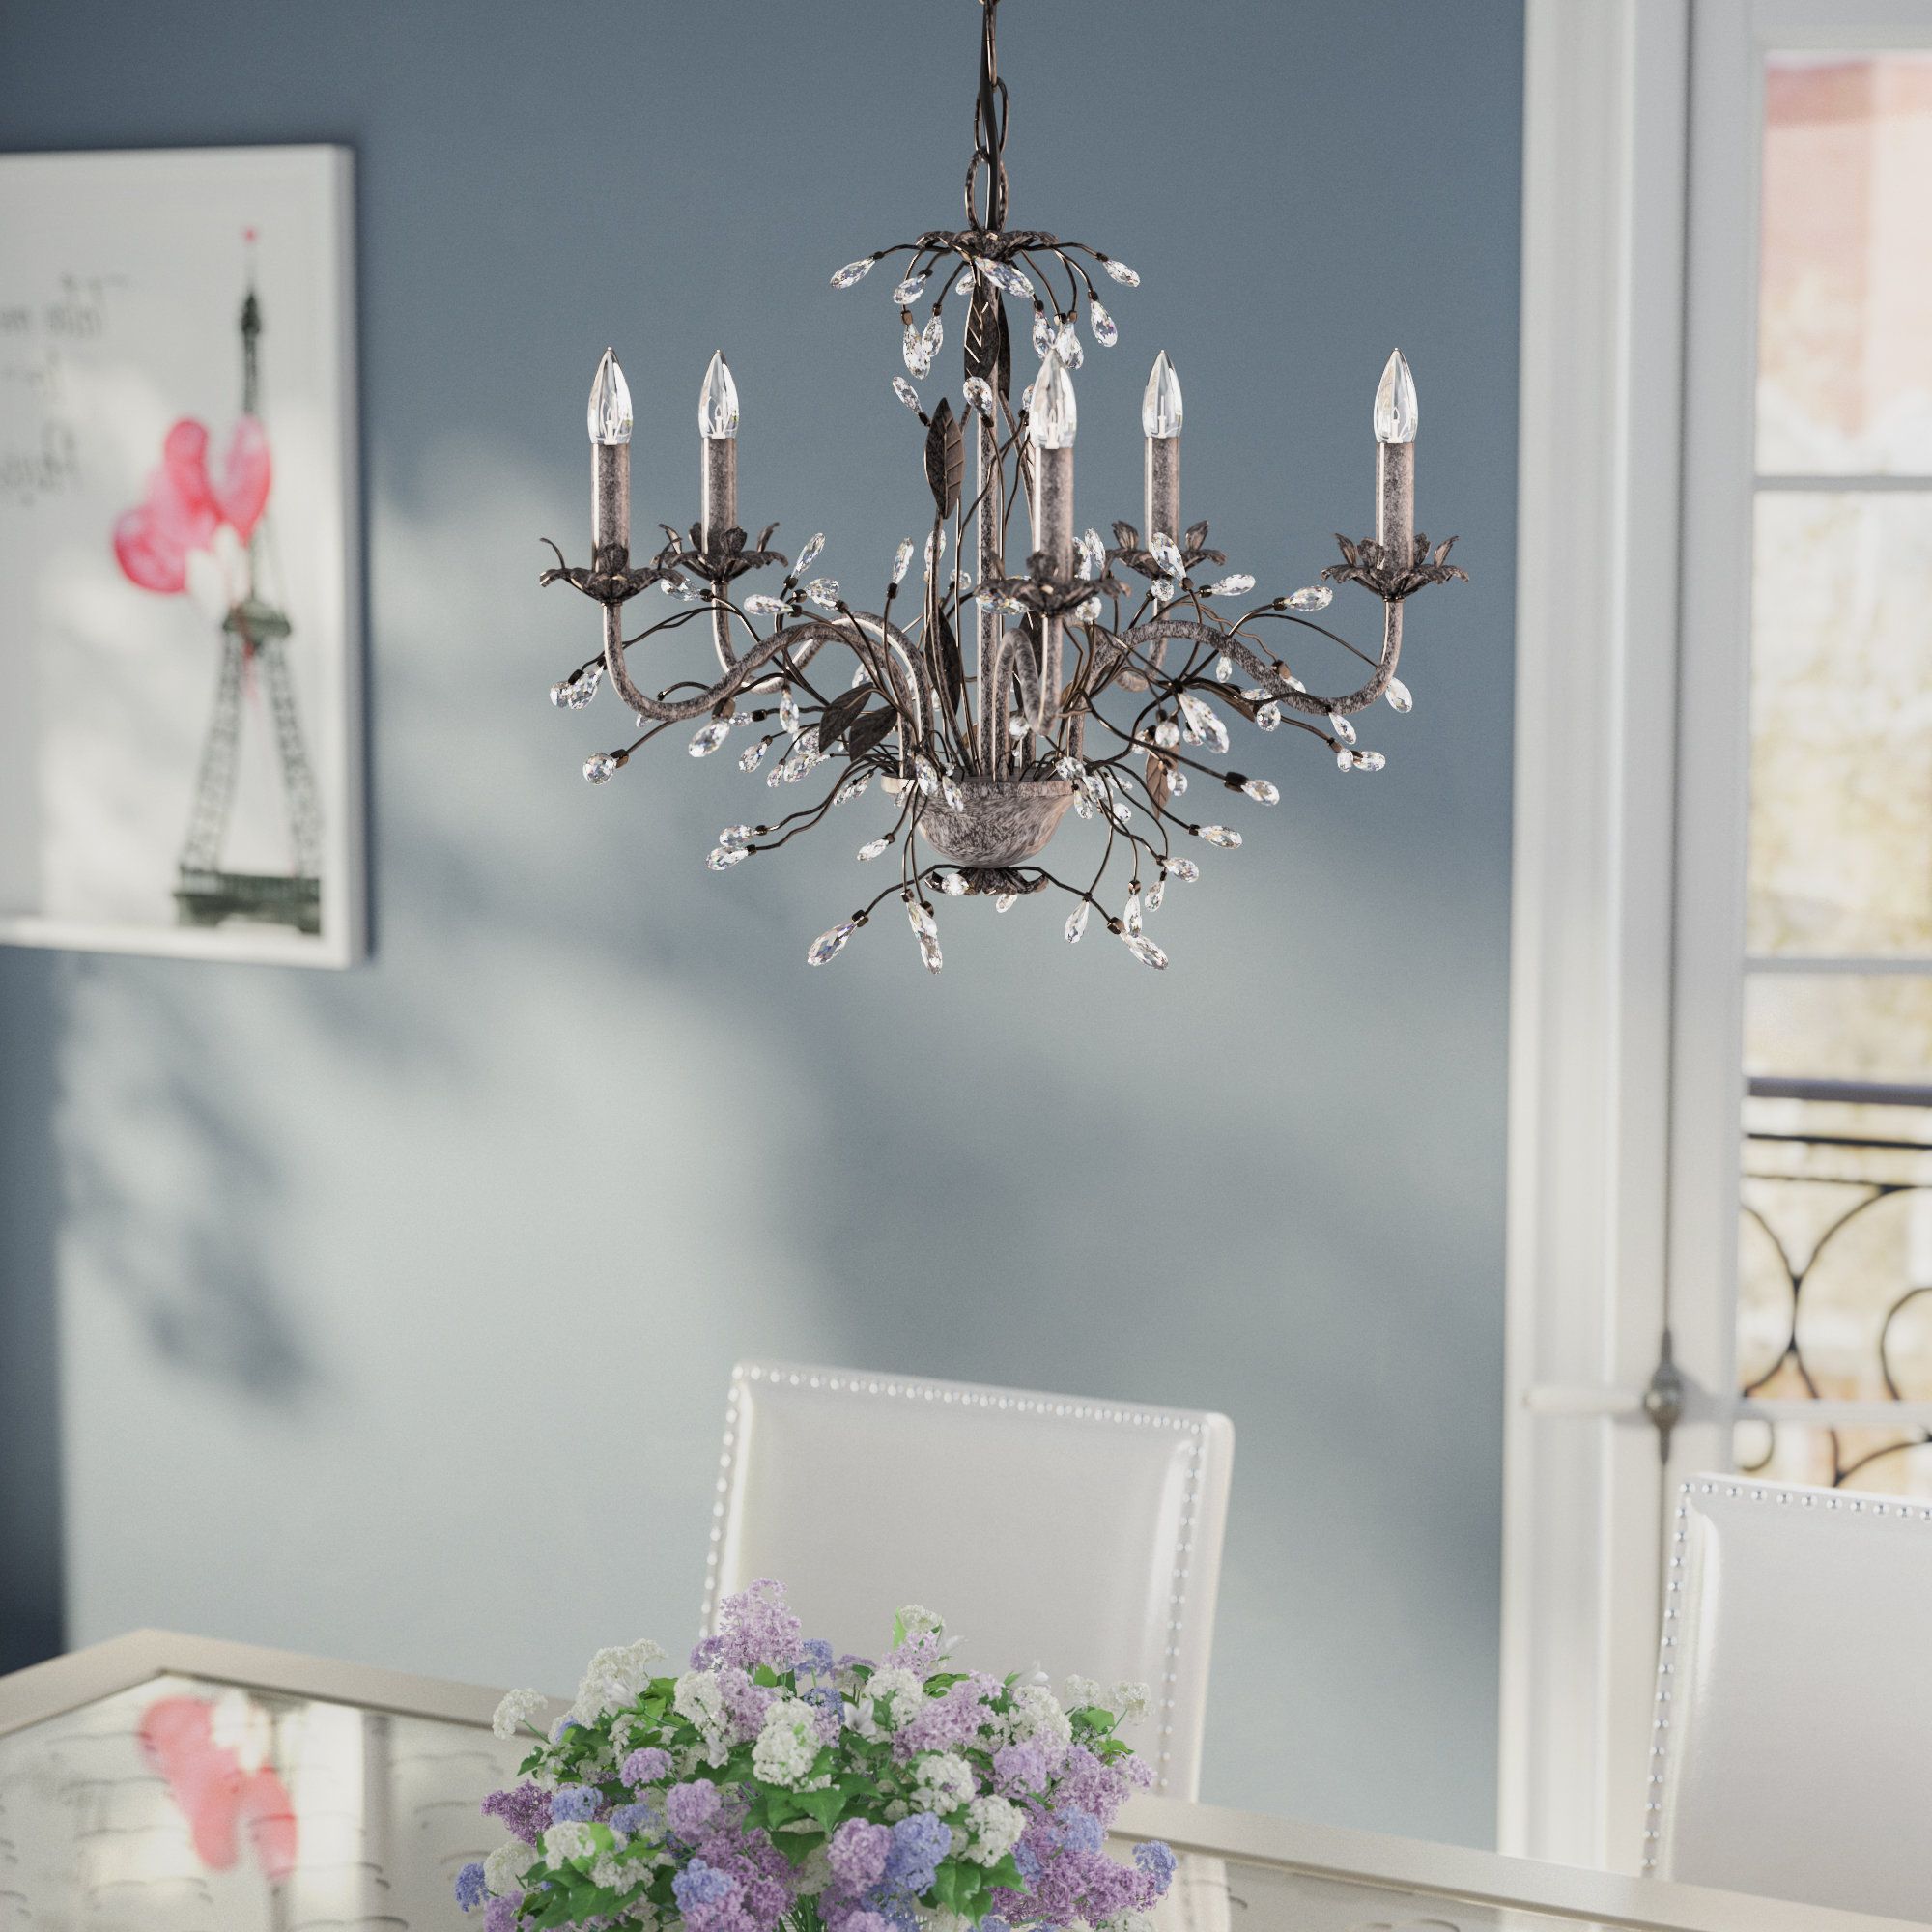 Hesse 5 Light Candle Style Chandelier With Regard To Well Known Hesse 5 Light Candle Style Chandeliers (Photo 1 of 25)